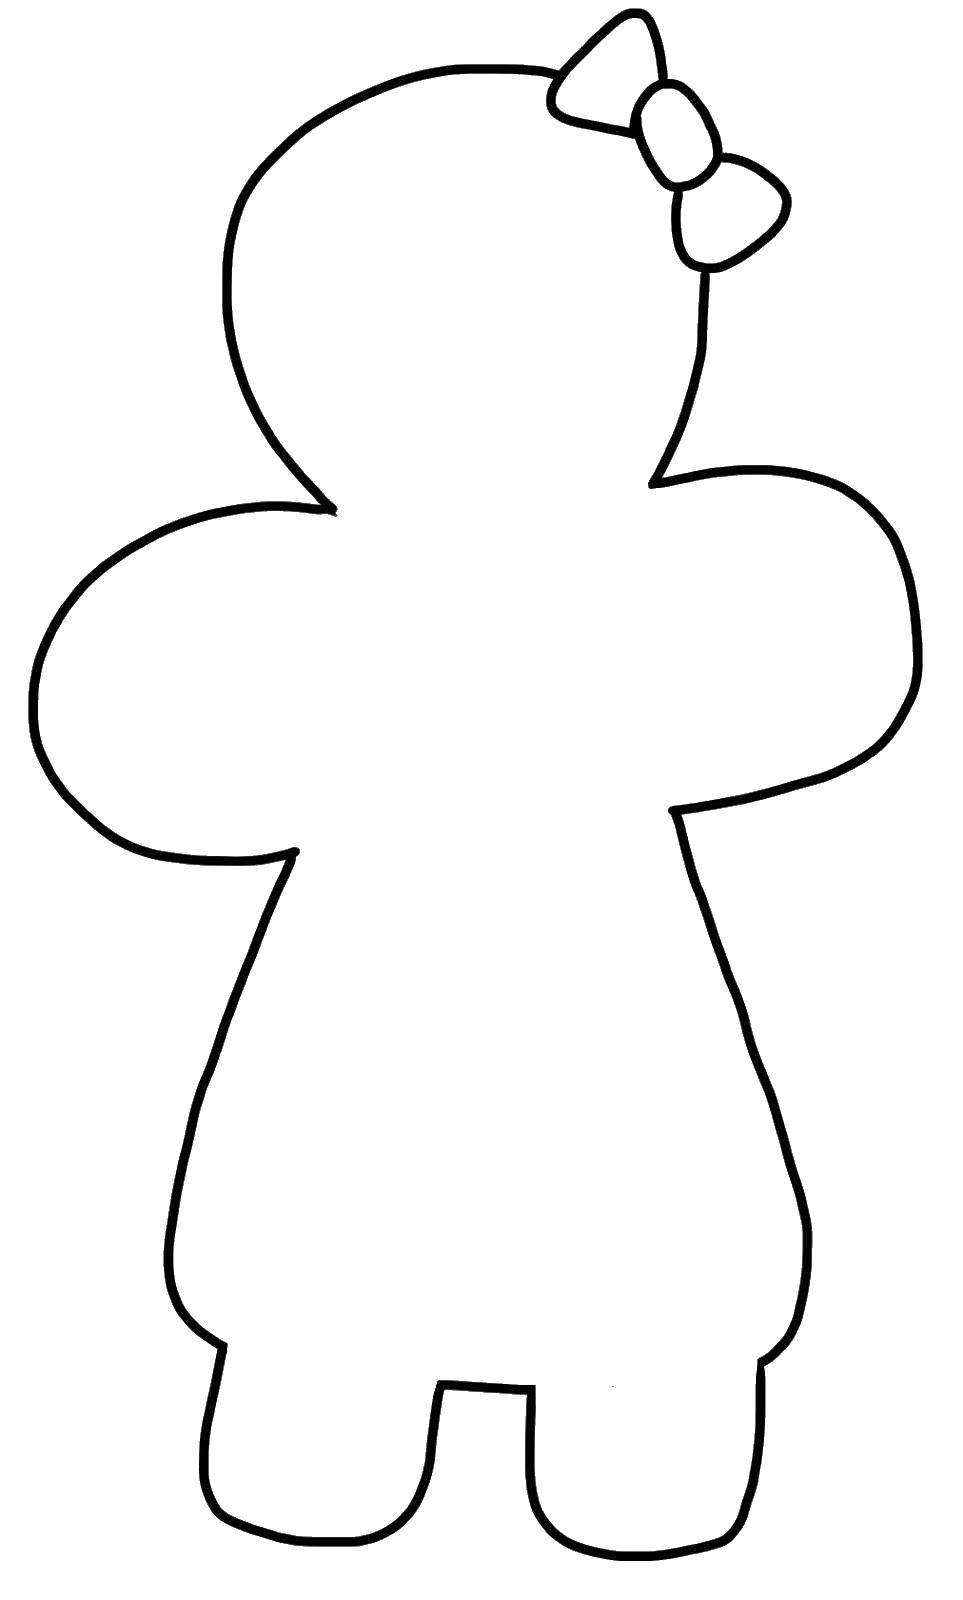 Coloring Doll. Category The contour of the doll . Tags:  doll, girl.